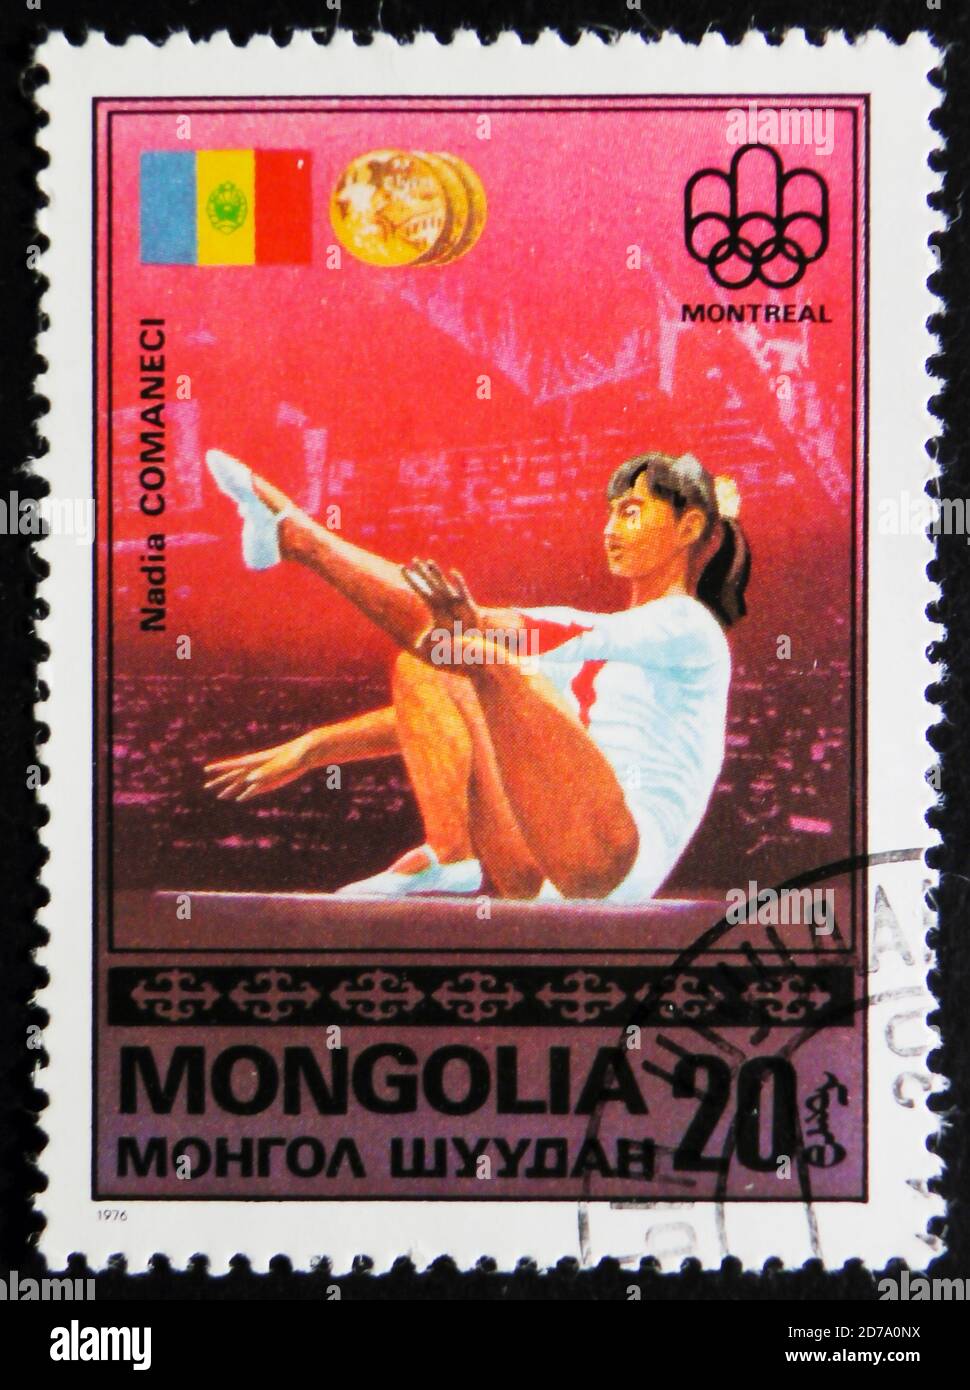 MOSCOW, RUSSIA - APRIL 2, 2017: A post stamp printed in Mongolia, shows Nadia Comaneci, from series "Olympic Games, Montreal - Gold Medal Winners", ci Stock Photo